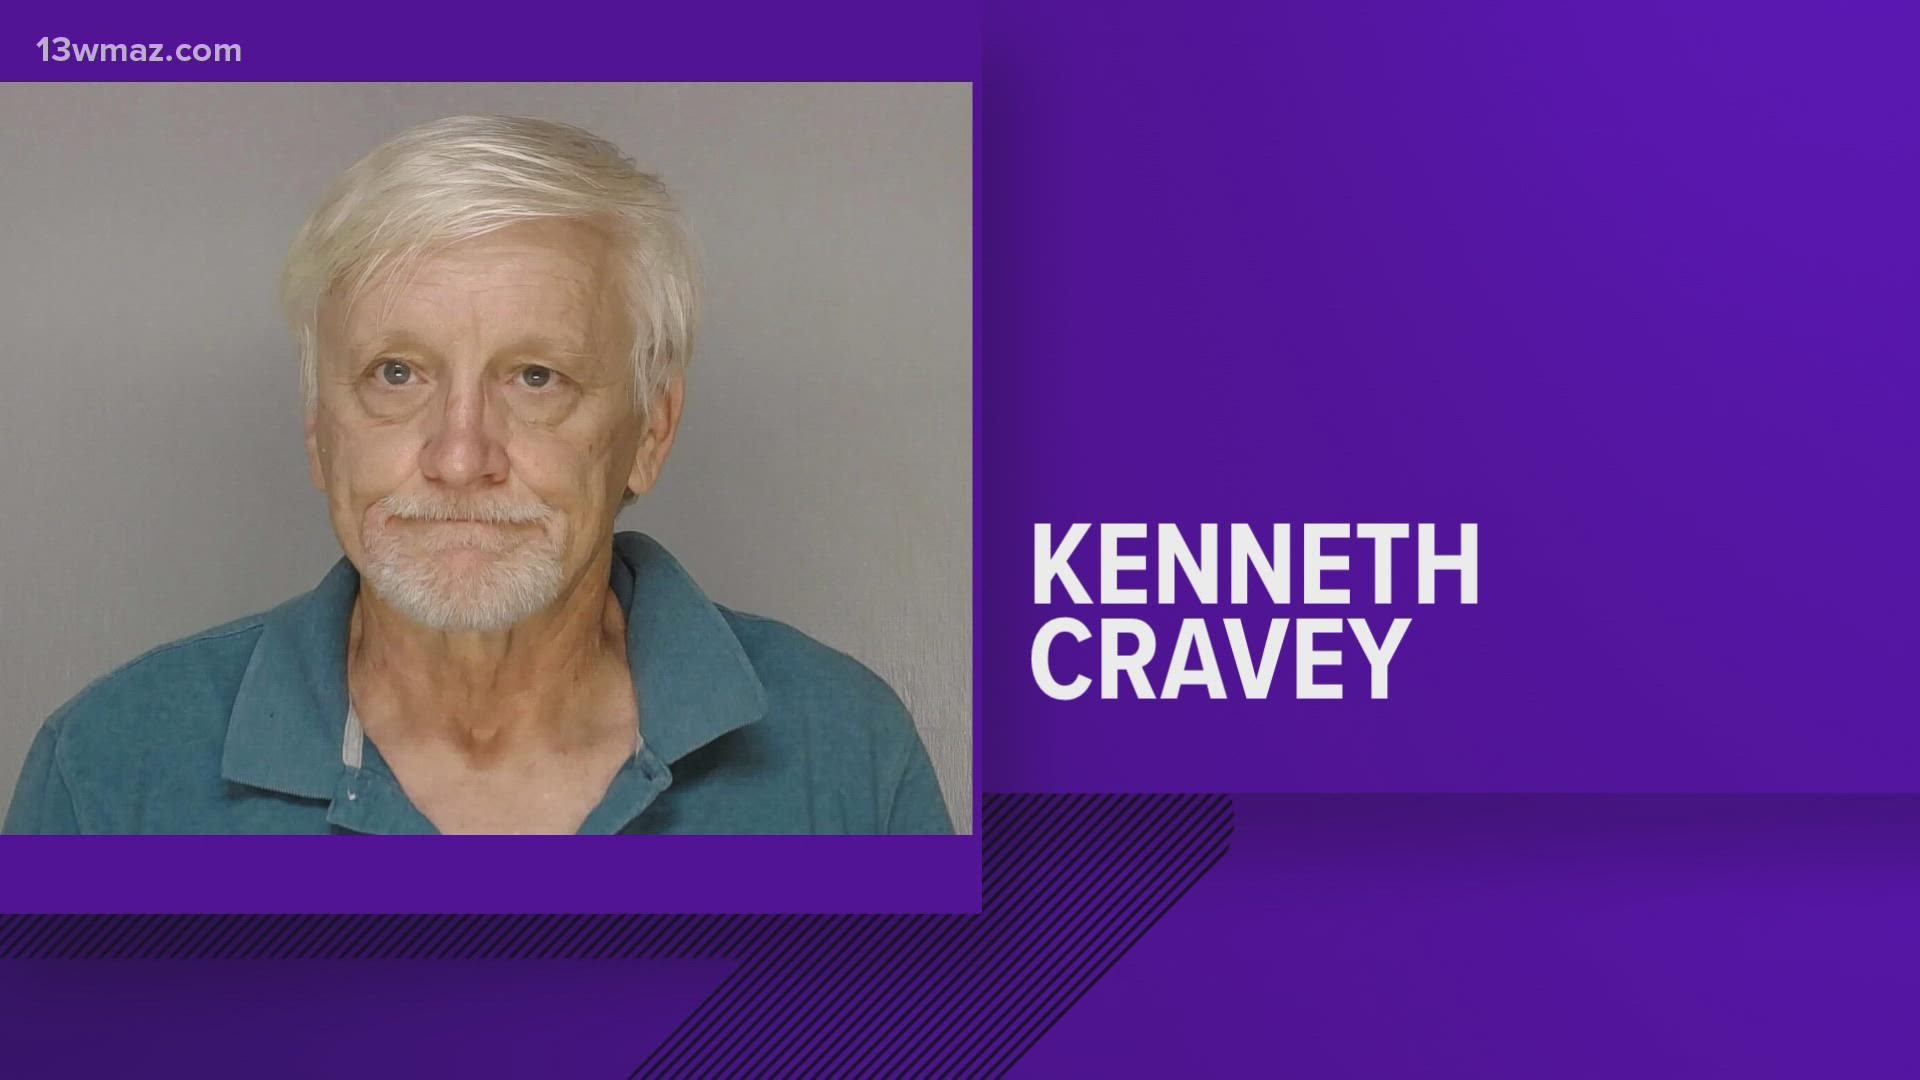 66-year-old Kenneth Thomas Cravey was arrested and charged with three counts of Aggravated Assault.